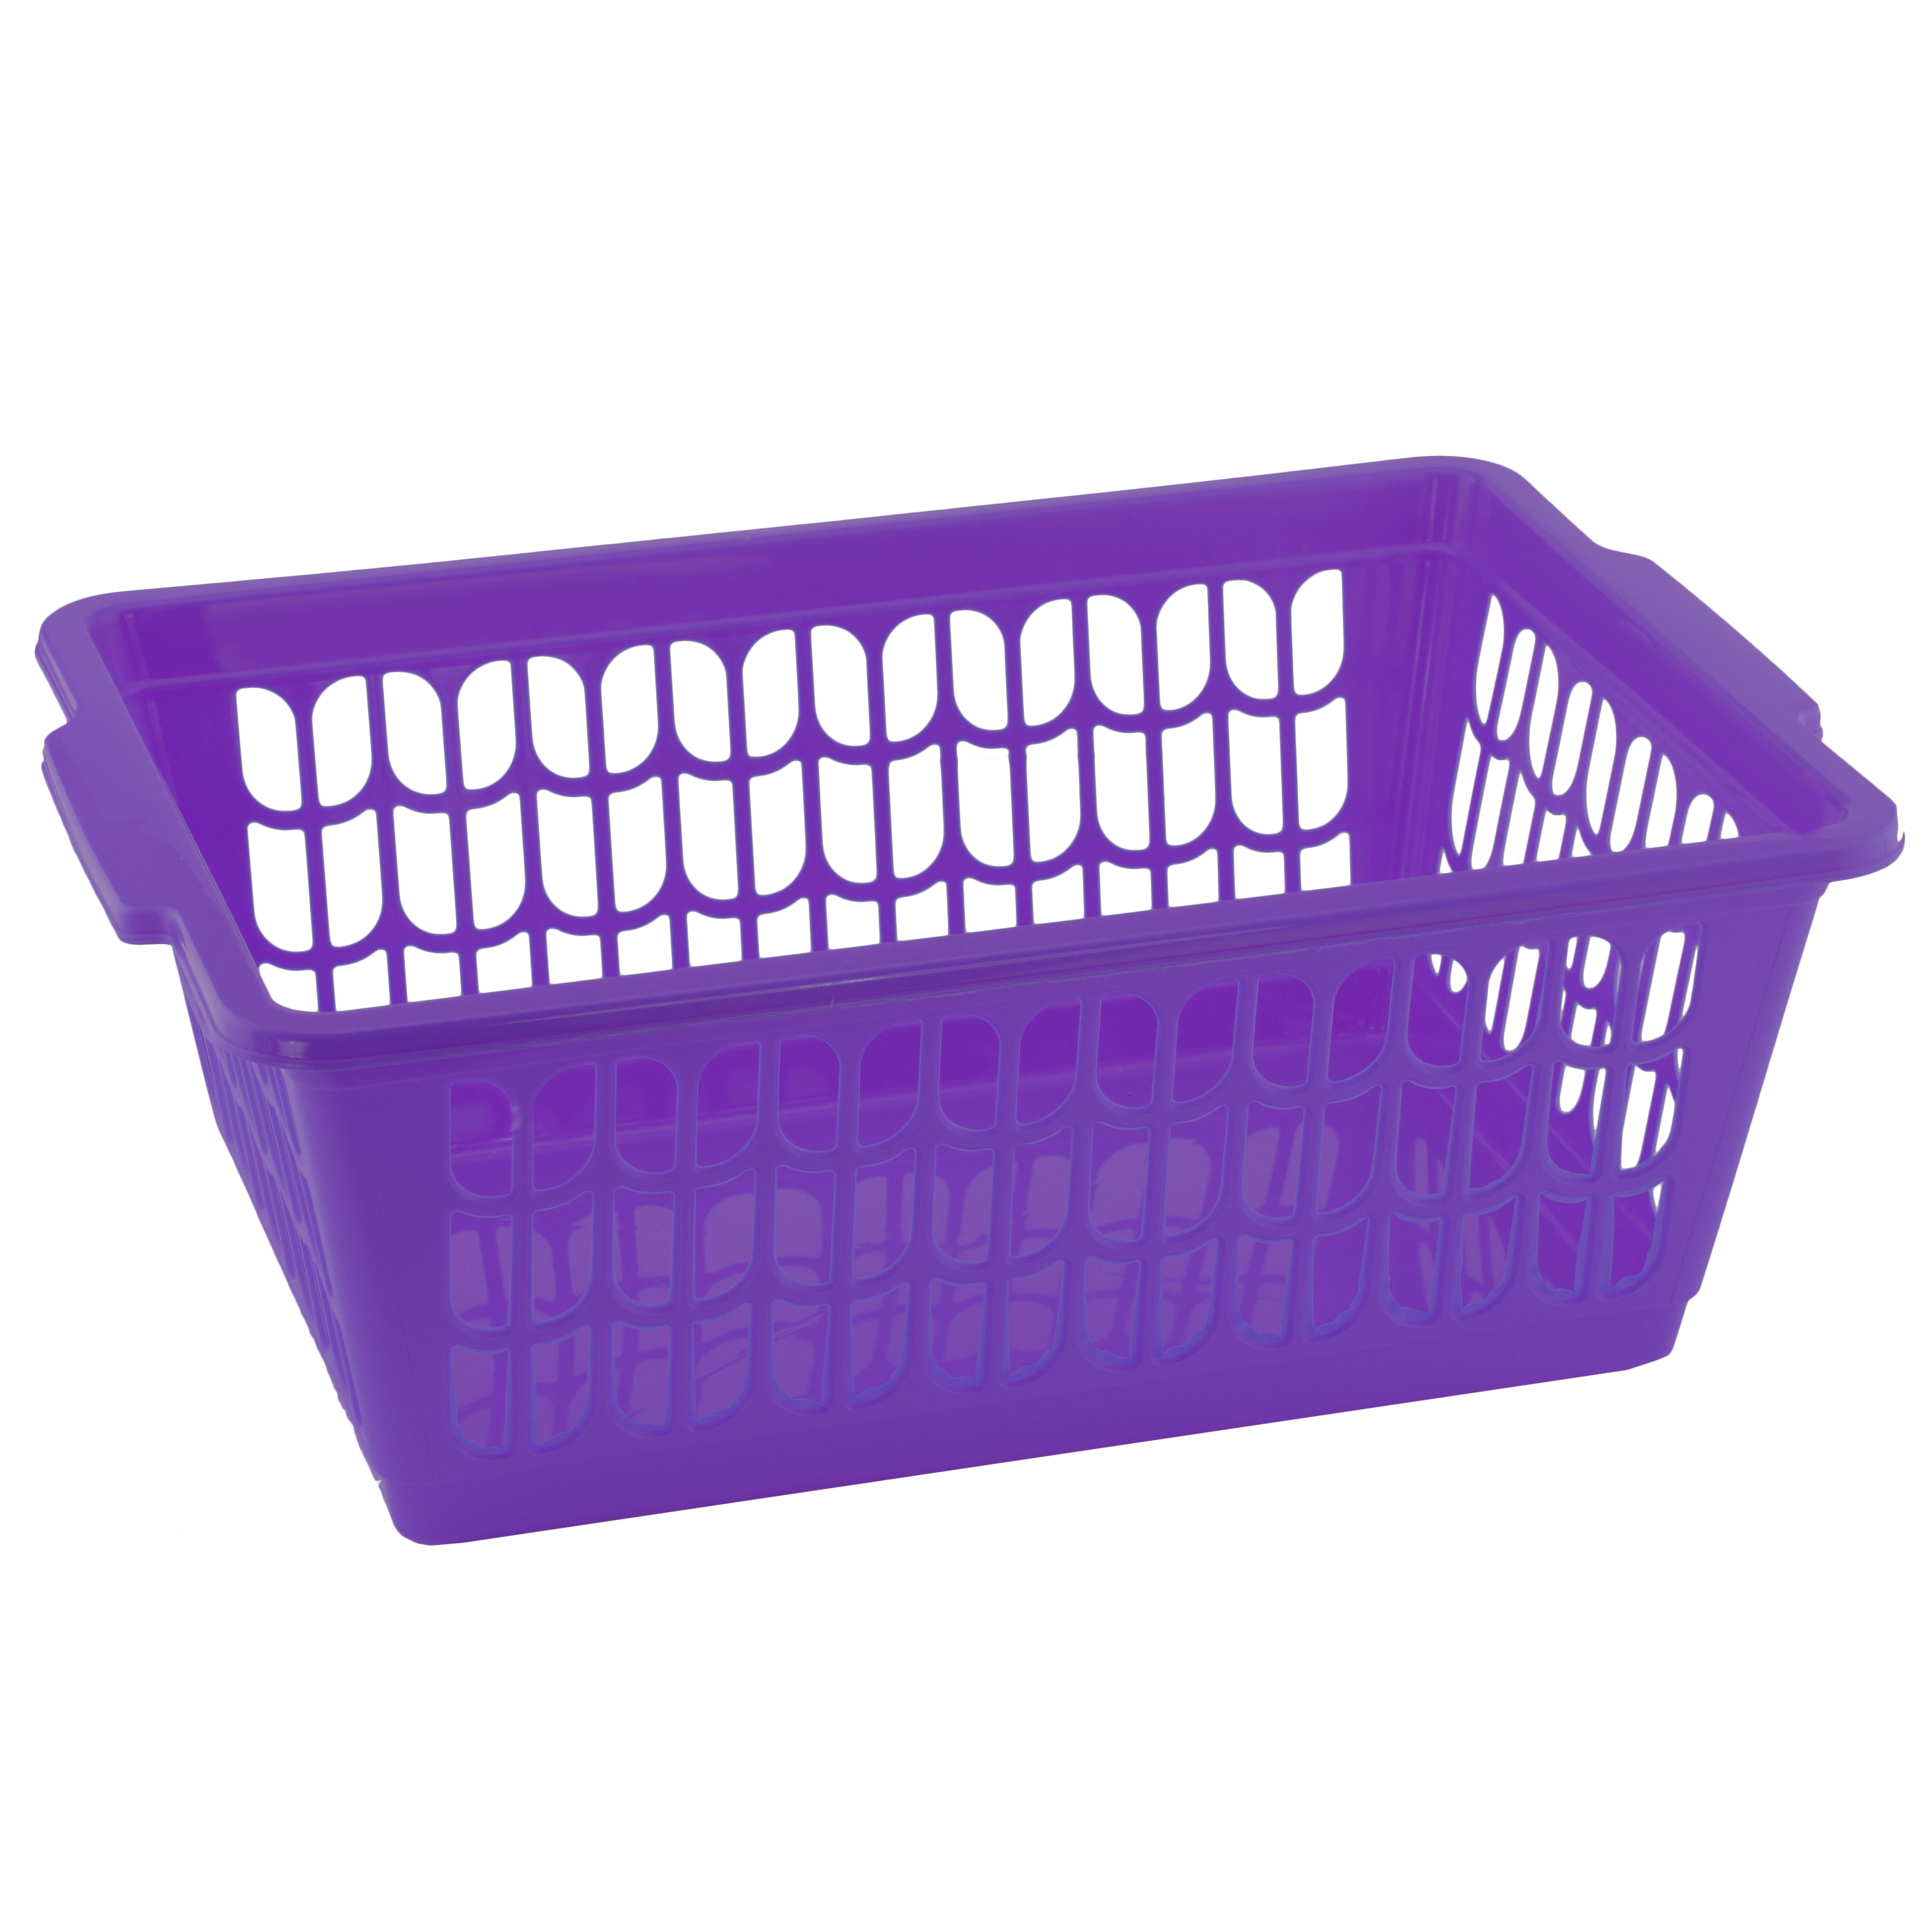 https://ak1.ostkcdn.com/images/products/is/images/direct/5de8b000448b112f86a5650c6b8696a3bbe9ddd7/Small-Plastic-Storage-Basket-for-Organizing-Kitchen-Pantry%2C-Countertop.jpg